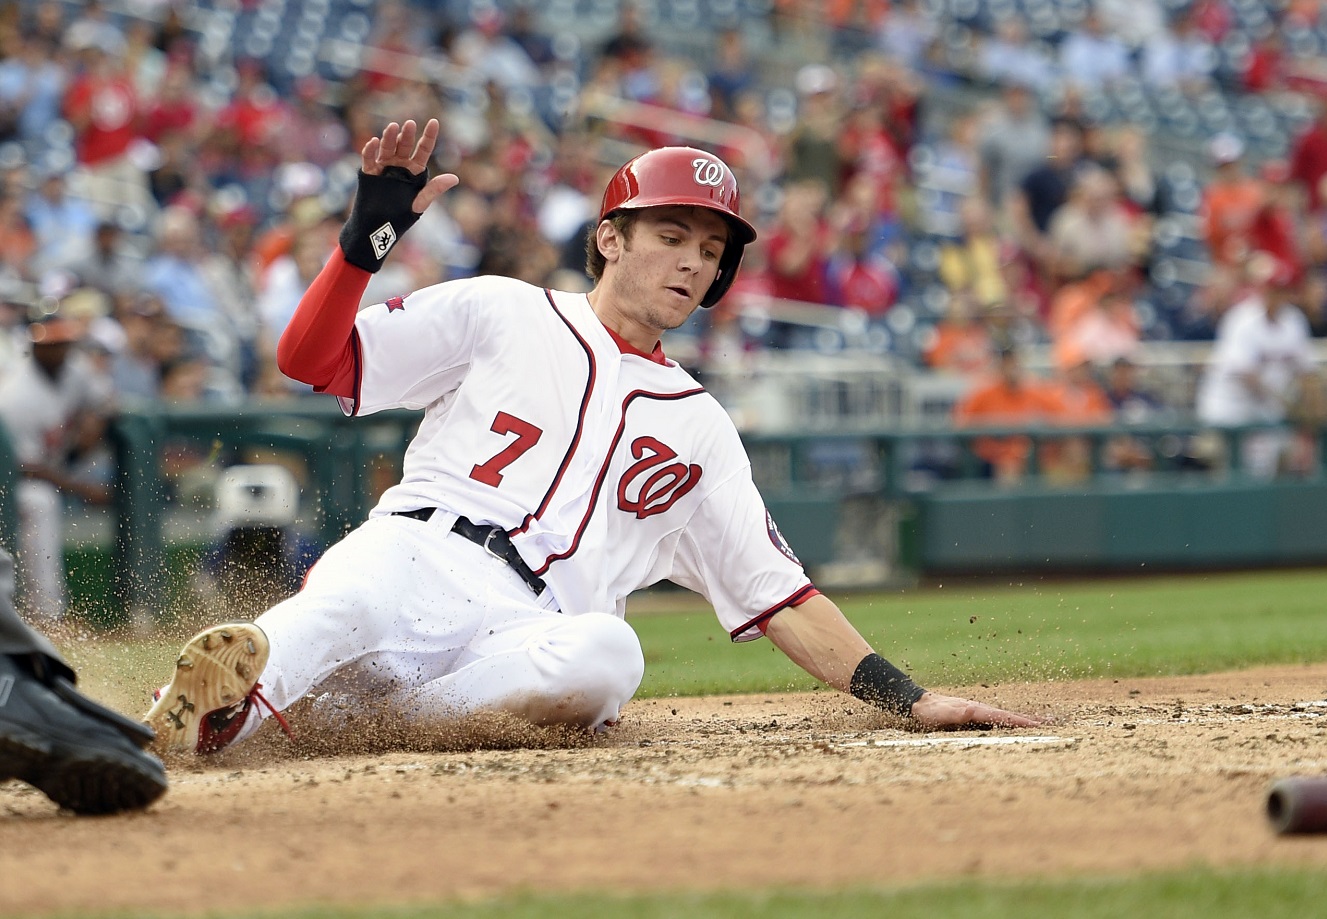 Washington Nationals' Trea Turner slides home to score on a single by Yunel Escobar during the fifth inning of an interleague baseball game against the Baltimore Orioles, Thursday, Sept. 24, 2015, in Washington. The Orioles won 5-4. (AP Photo/Nick Wass)